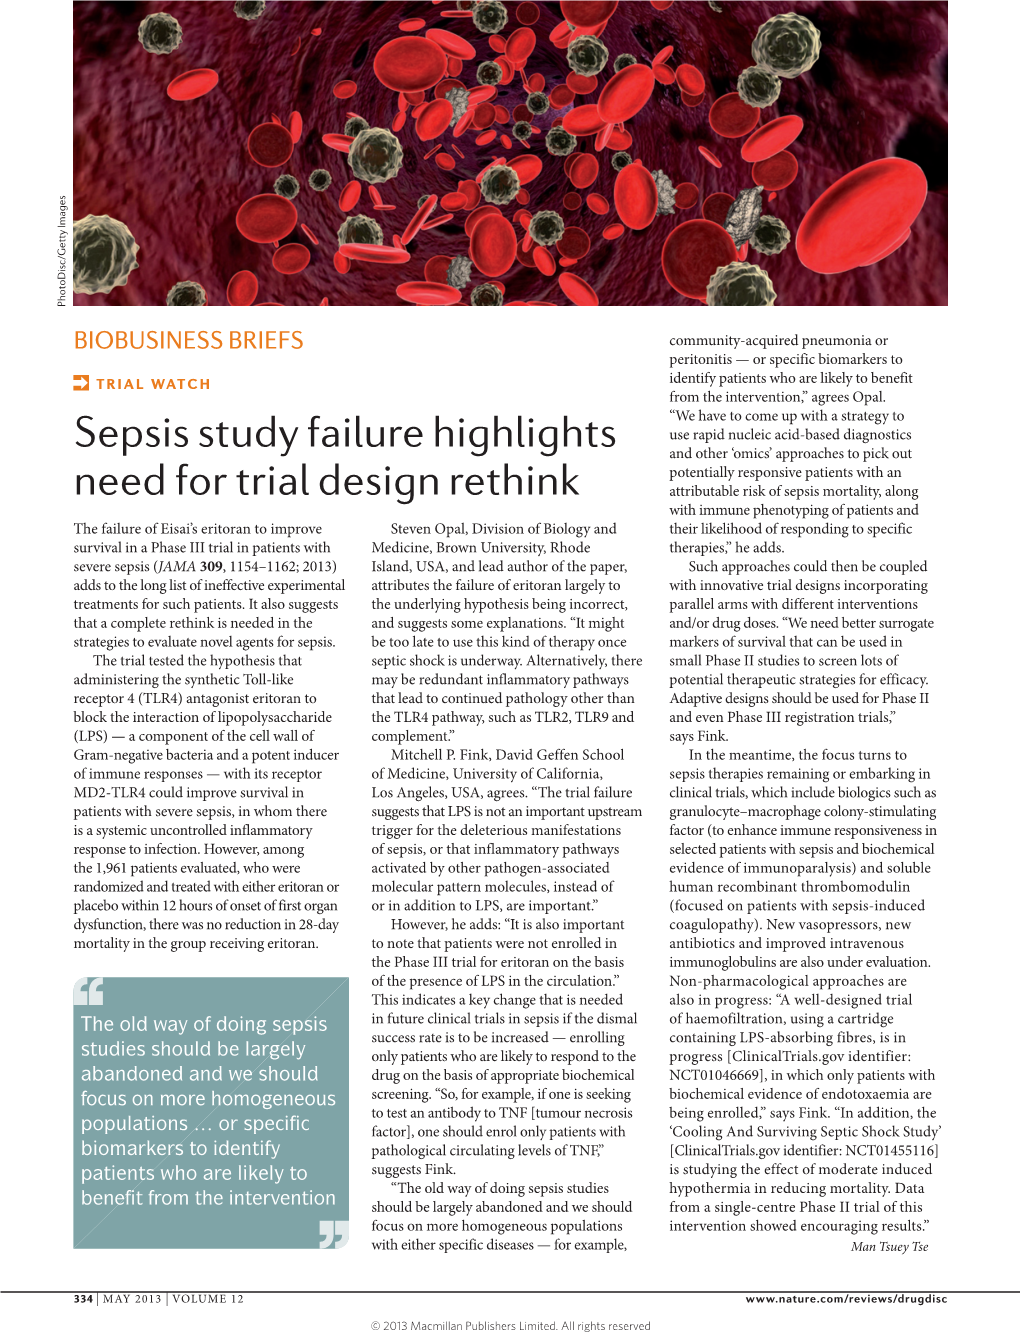 Sepsis Study Failure Highlights Need for Trial Design Rethink